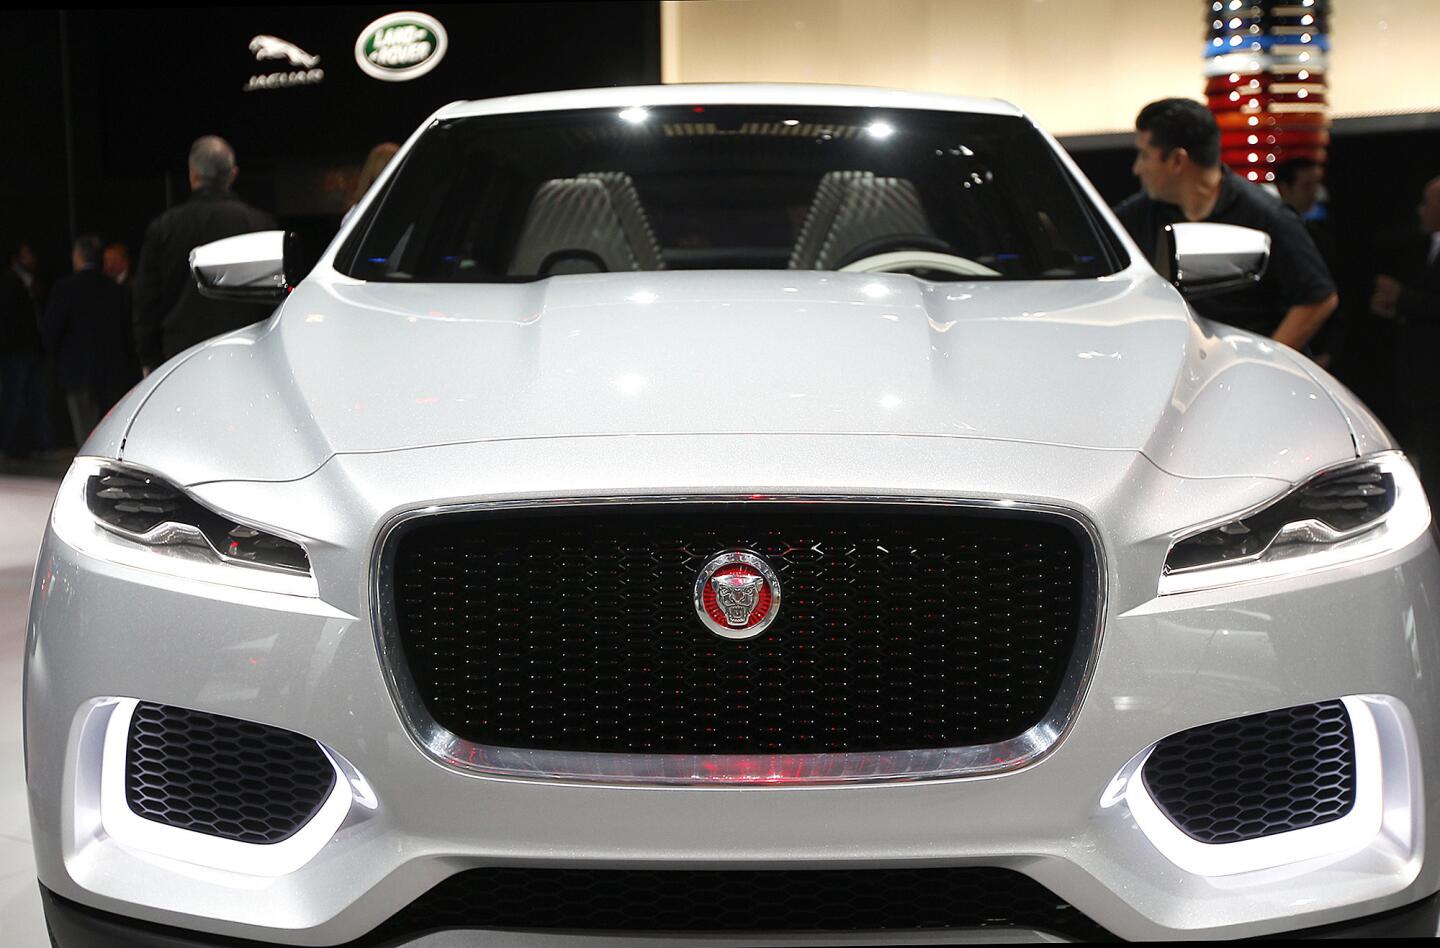 Jaguar C-X17 concept is displayed during the 2013 LA Auto Show at the LA Convention Center in downtown Los Angeles.